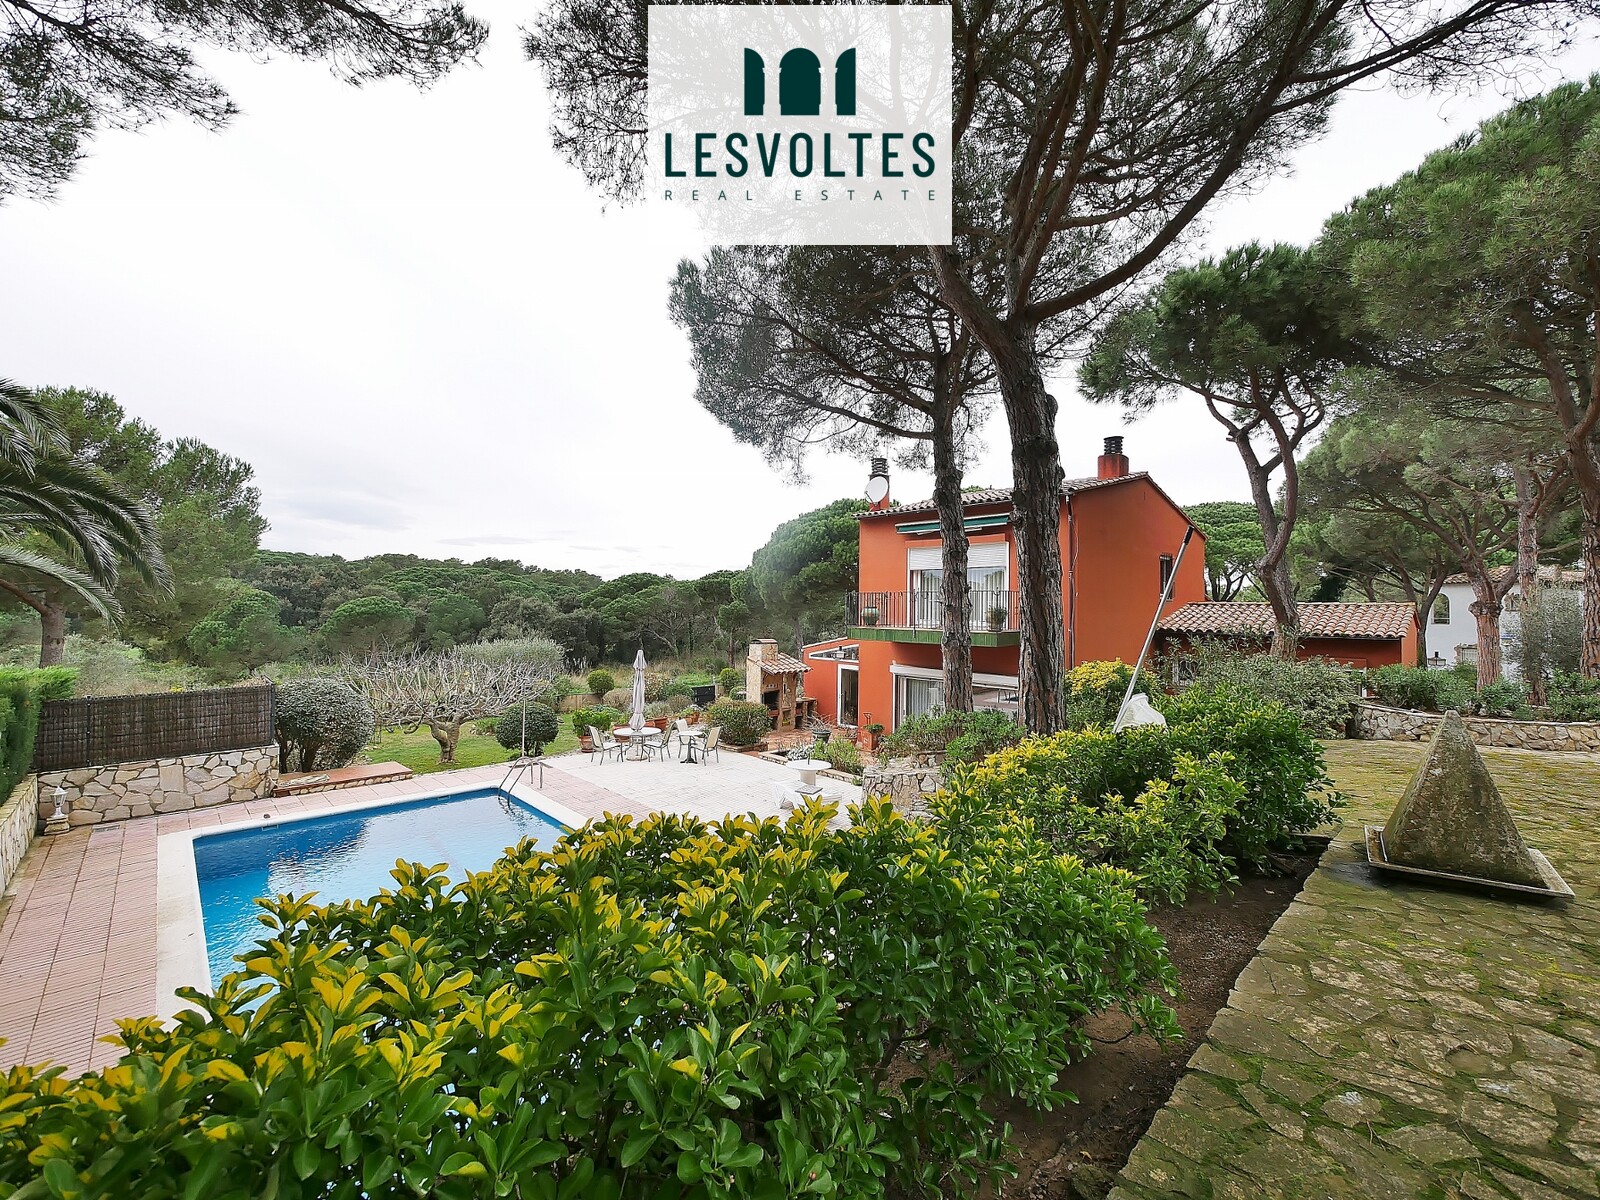 SINGLE FAMILY HOUSE WITH LARGE GARDEN AND POOL IN THE GOLFET AREA OF CALELLA DE PALAFRUGELL. FINCA WITH MANY POSSIBILITIES